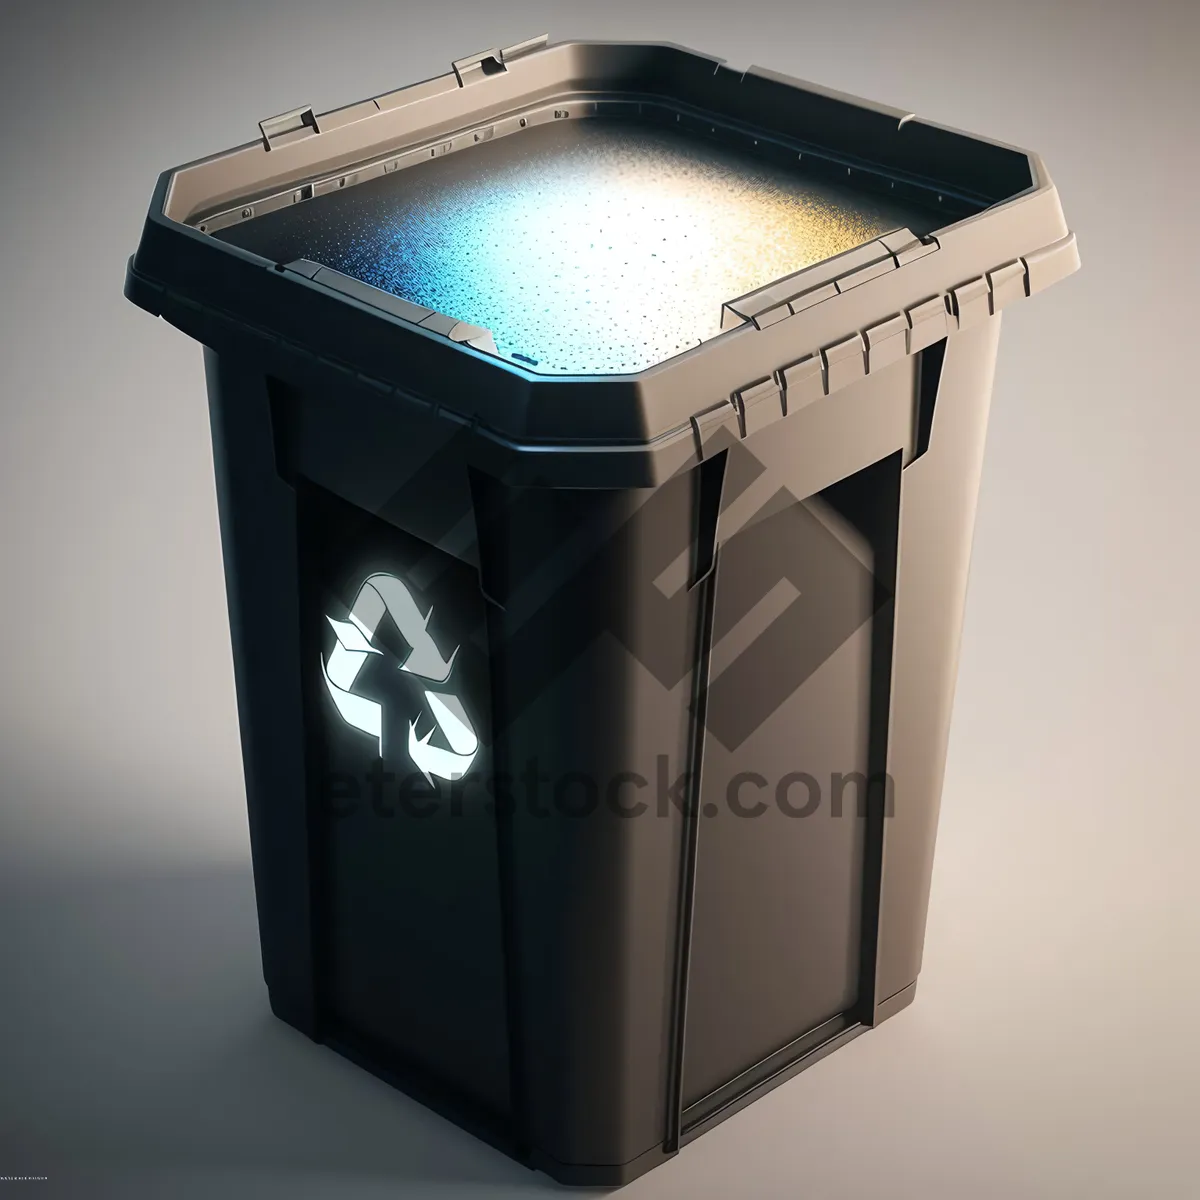 Picture of Recycle Bin: Efficient Waste Management Solution